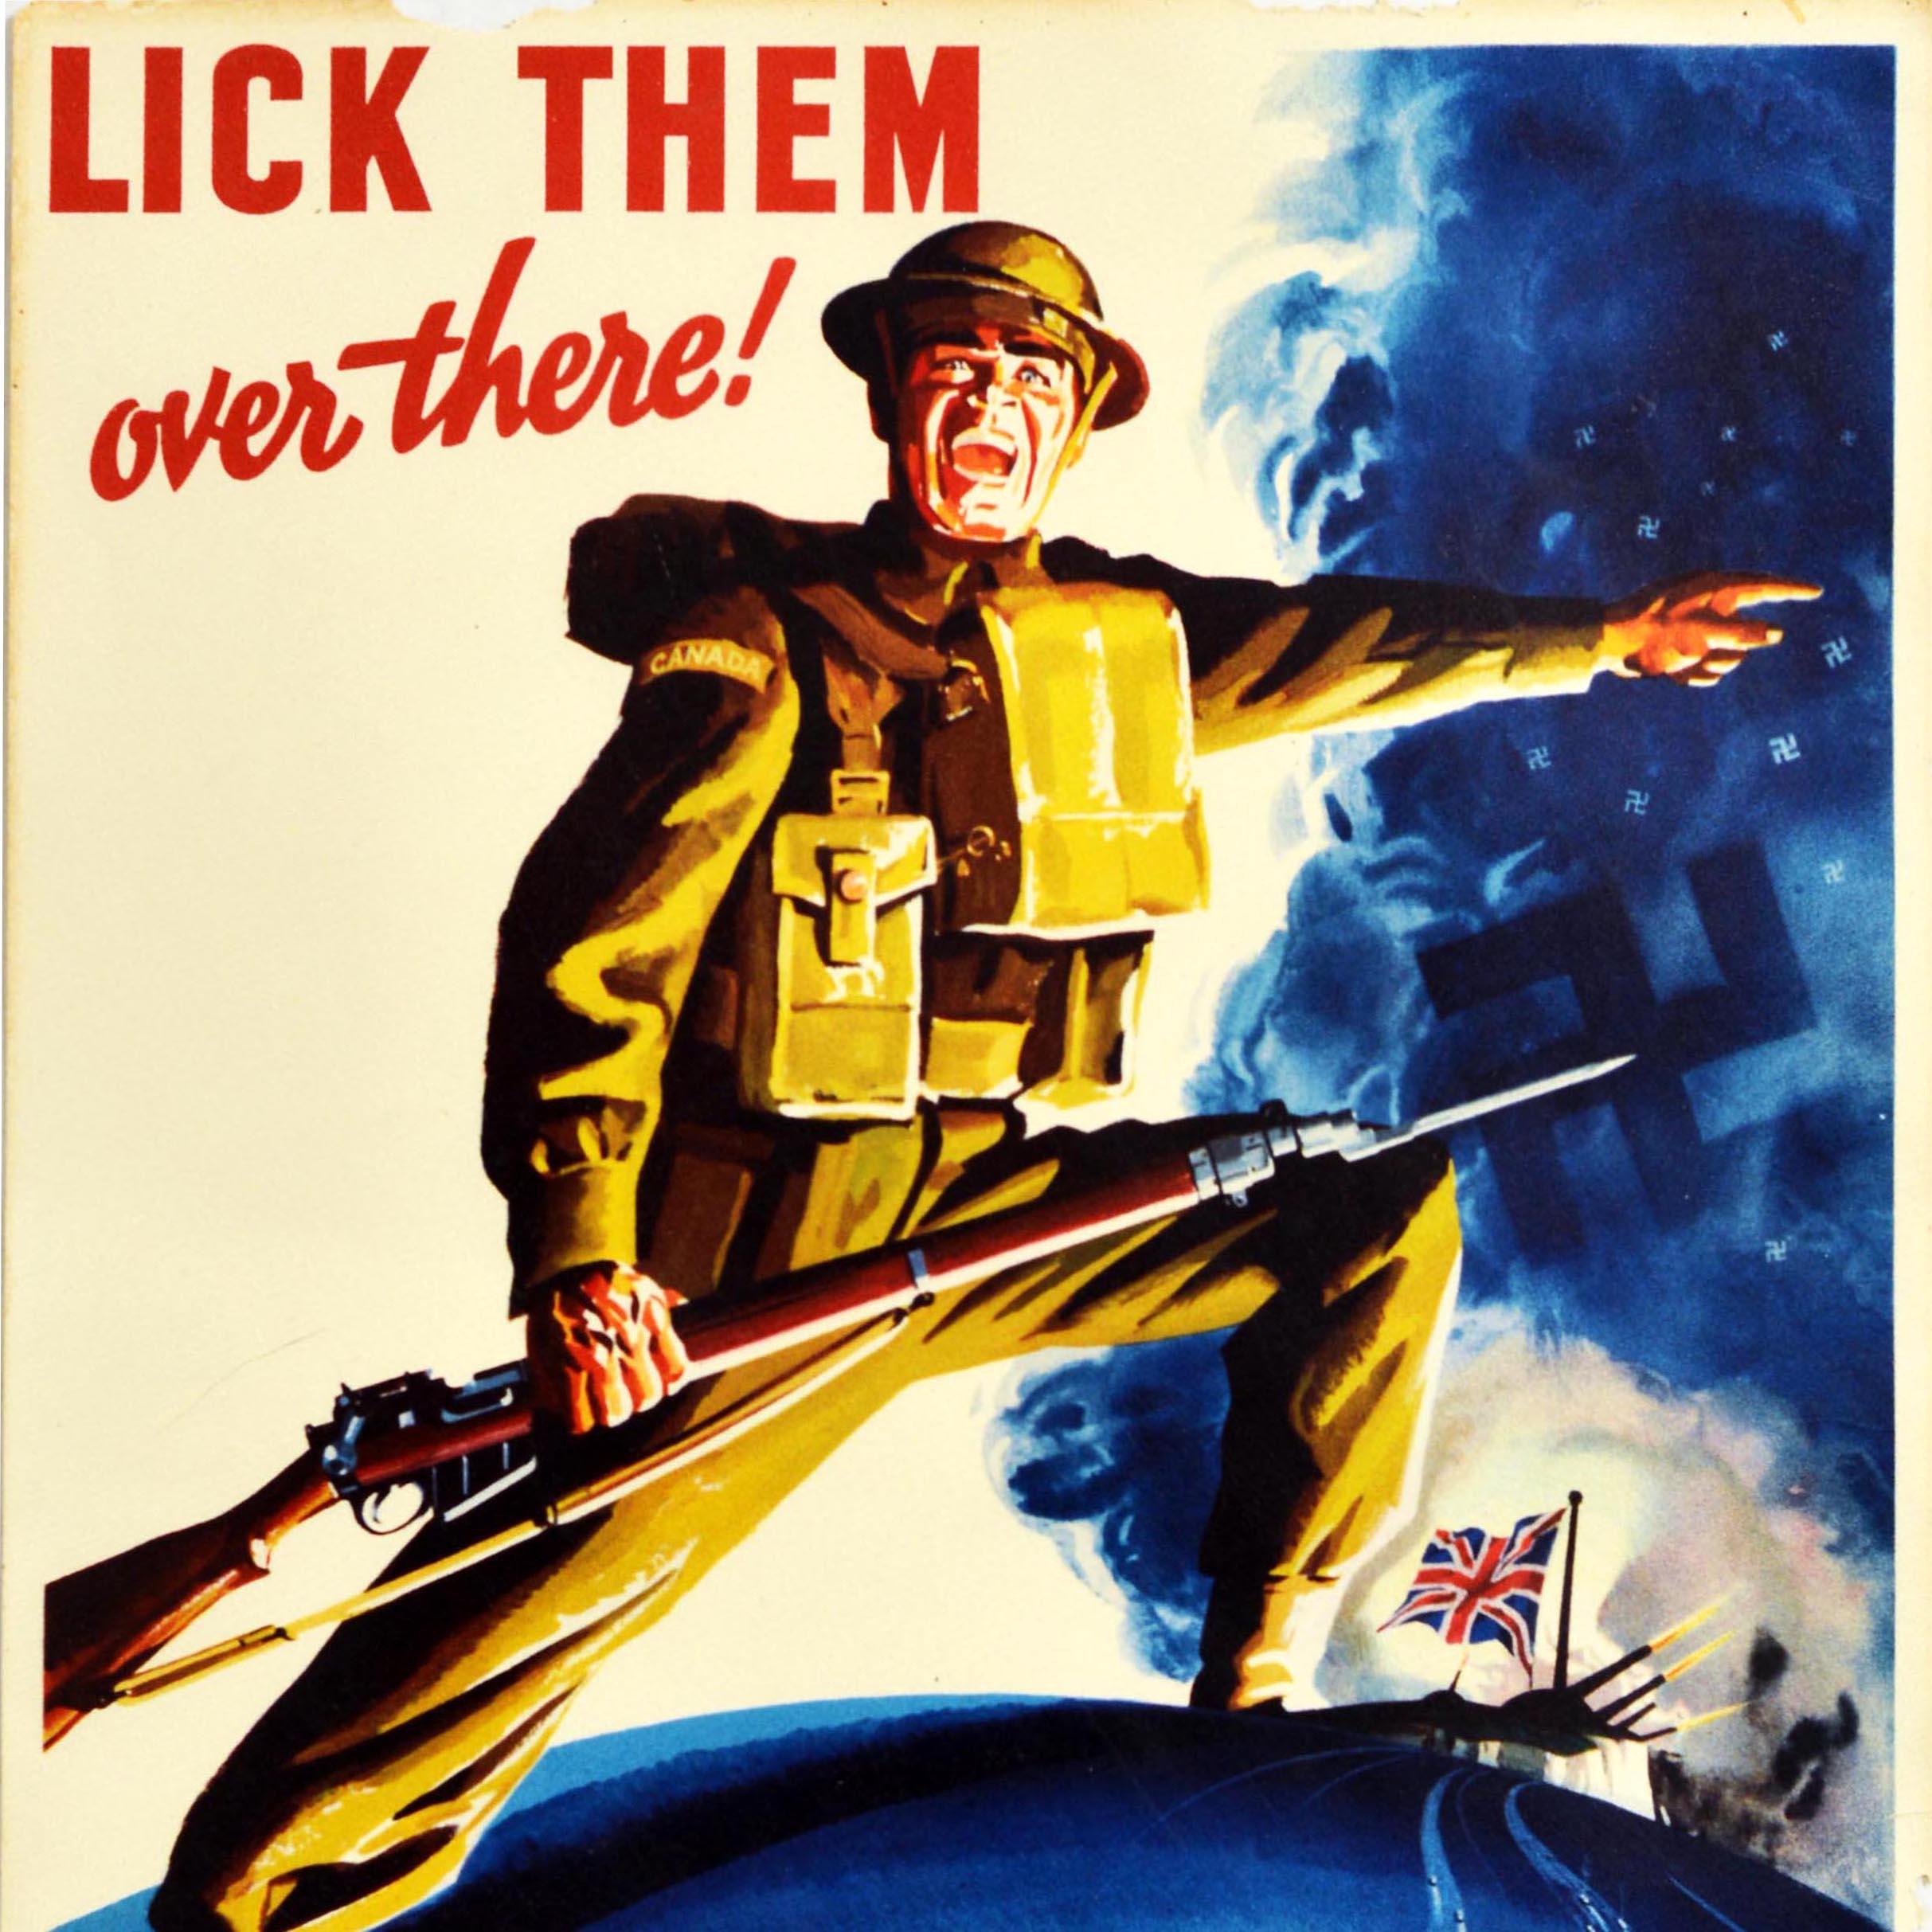 lick them over there poster